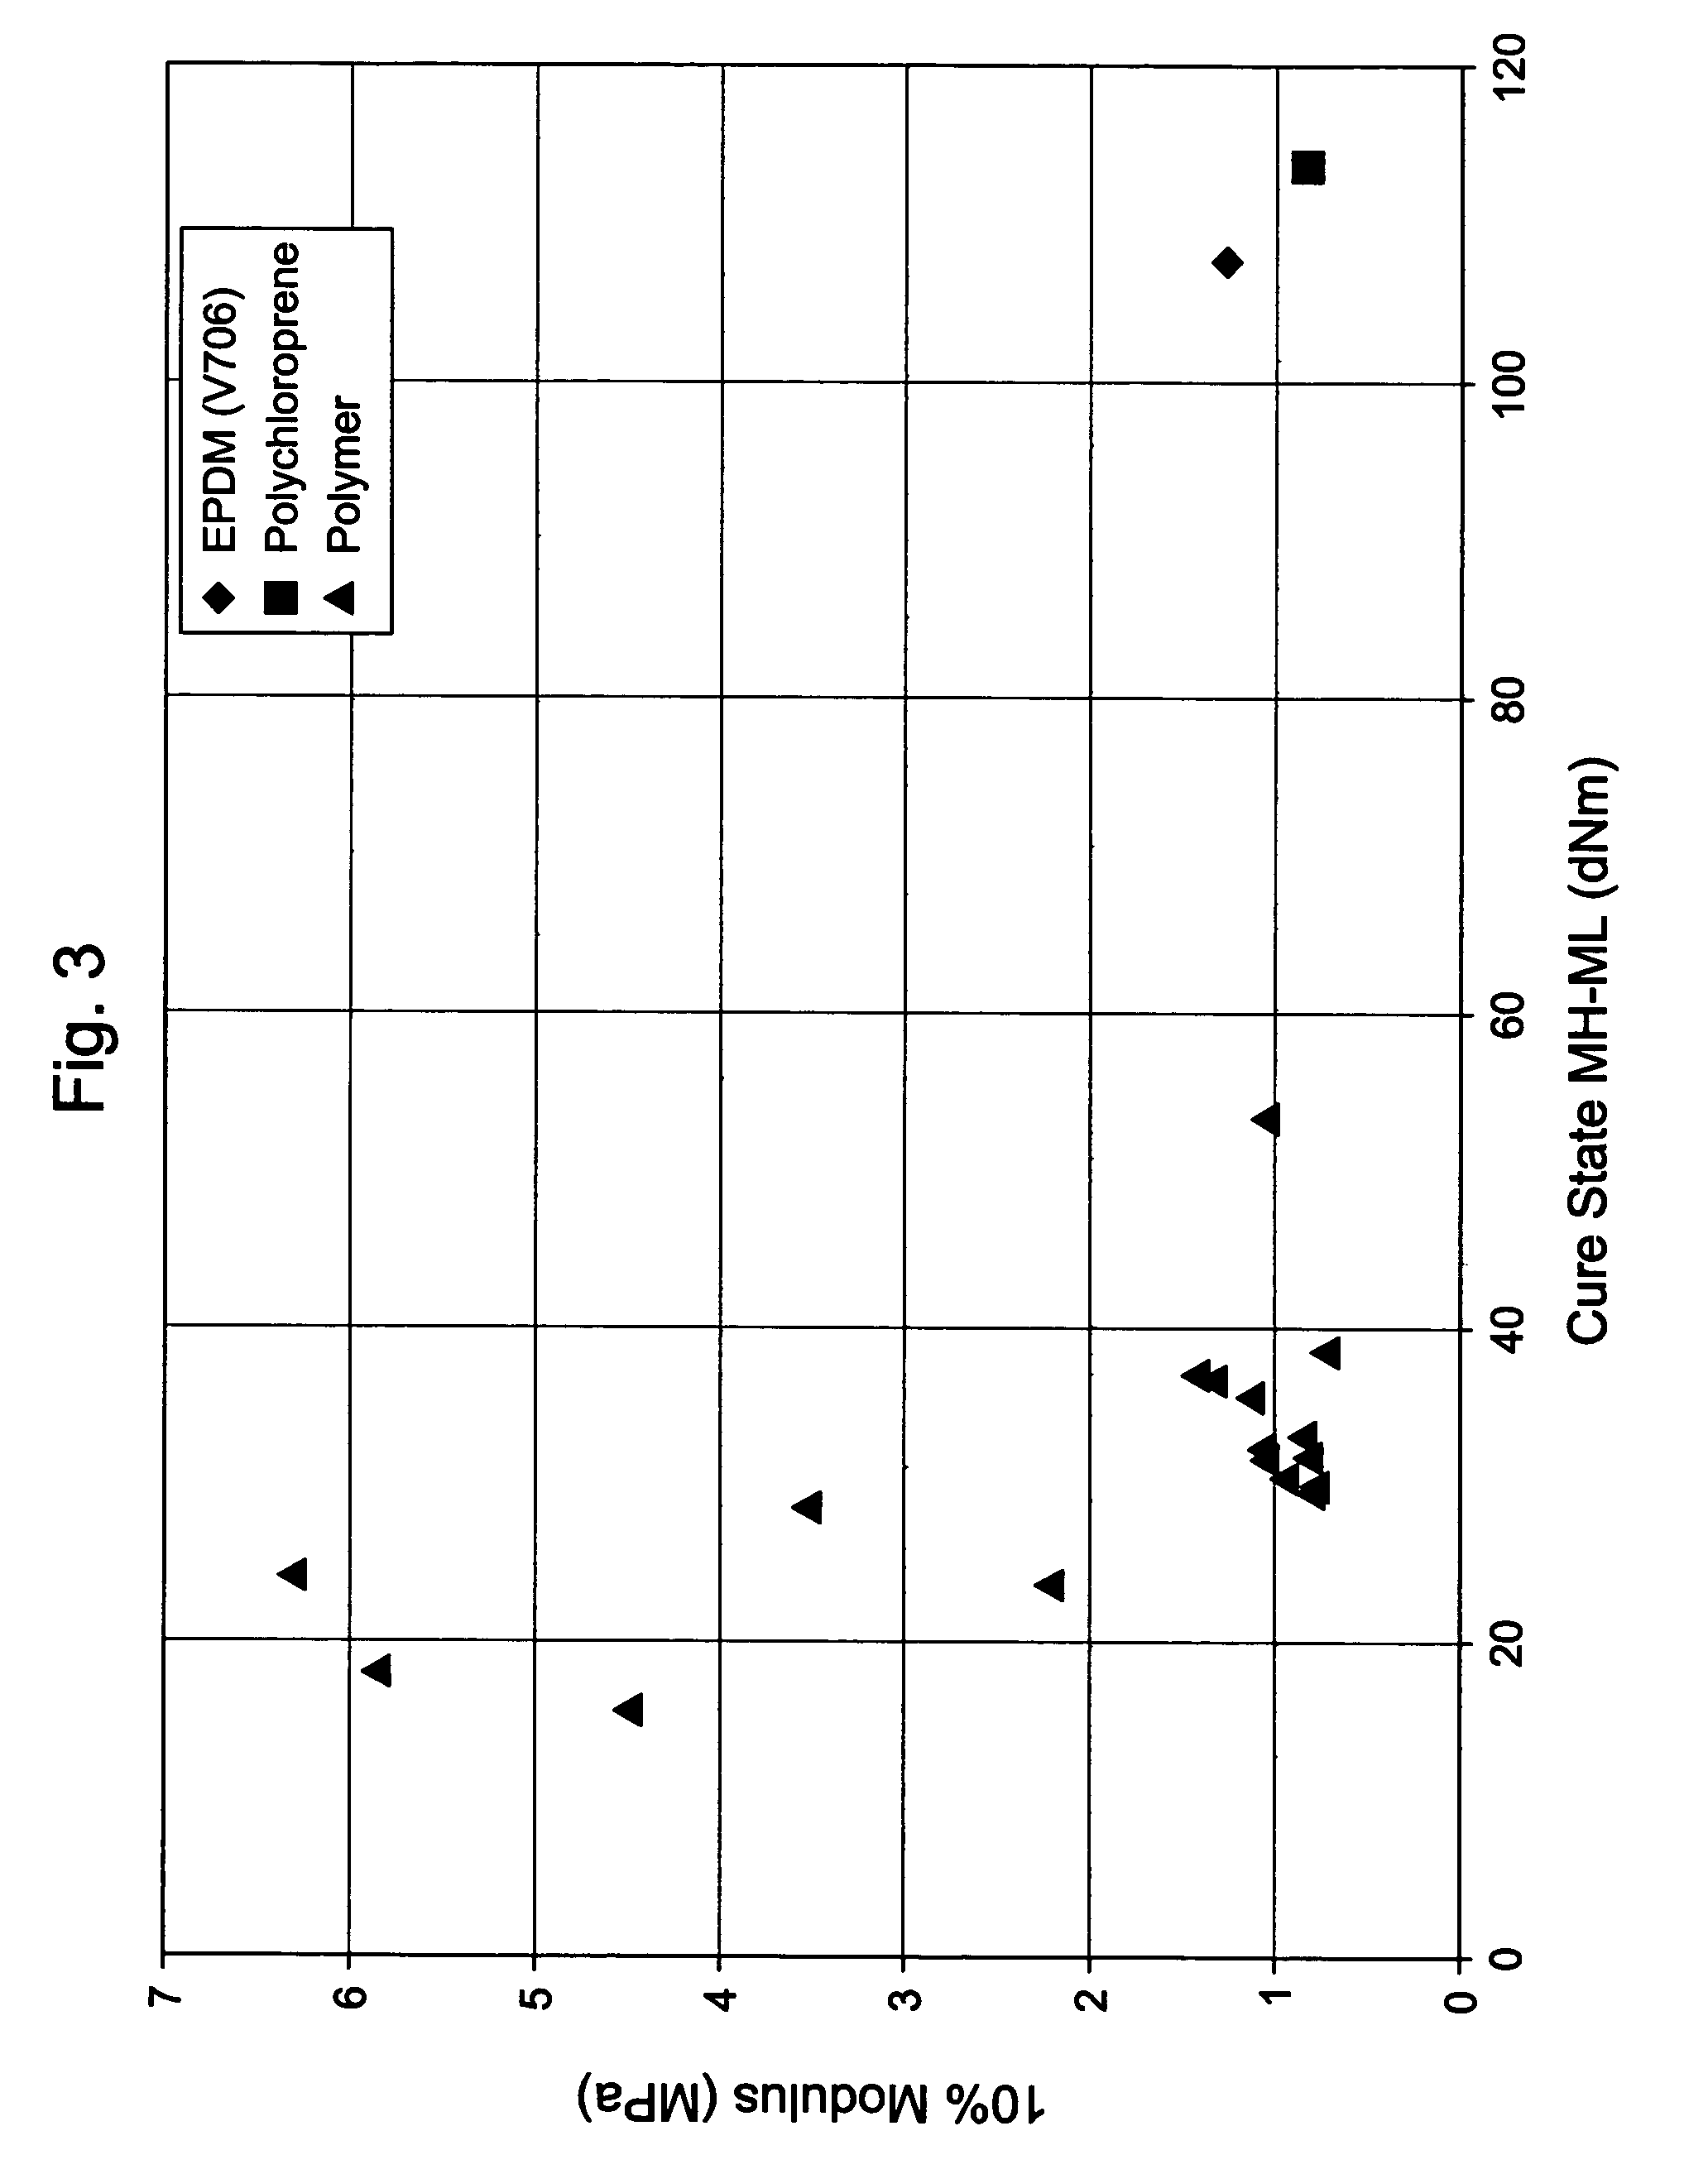 Process for making dynamically-loaded articles comprising propylene-based elastomers, composition for use in such processes, and article made using such processes